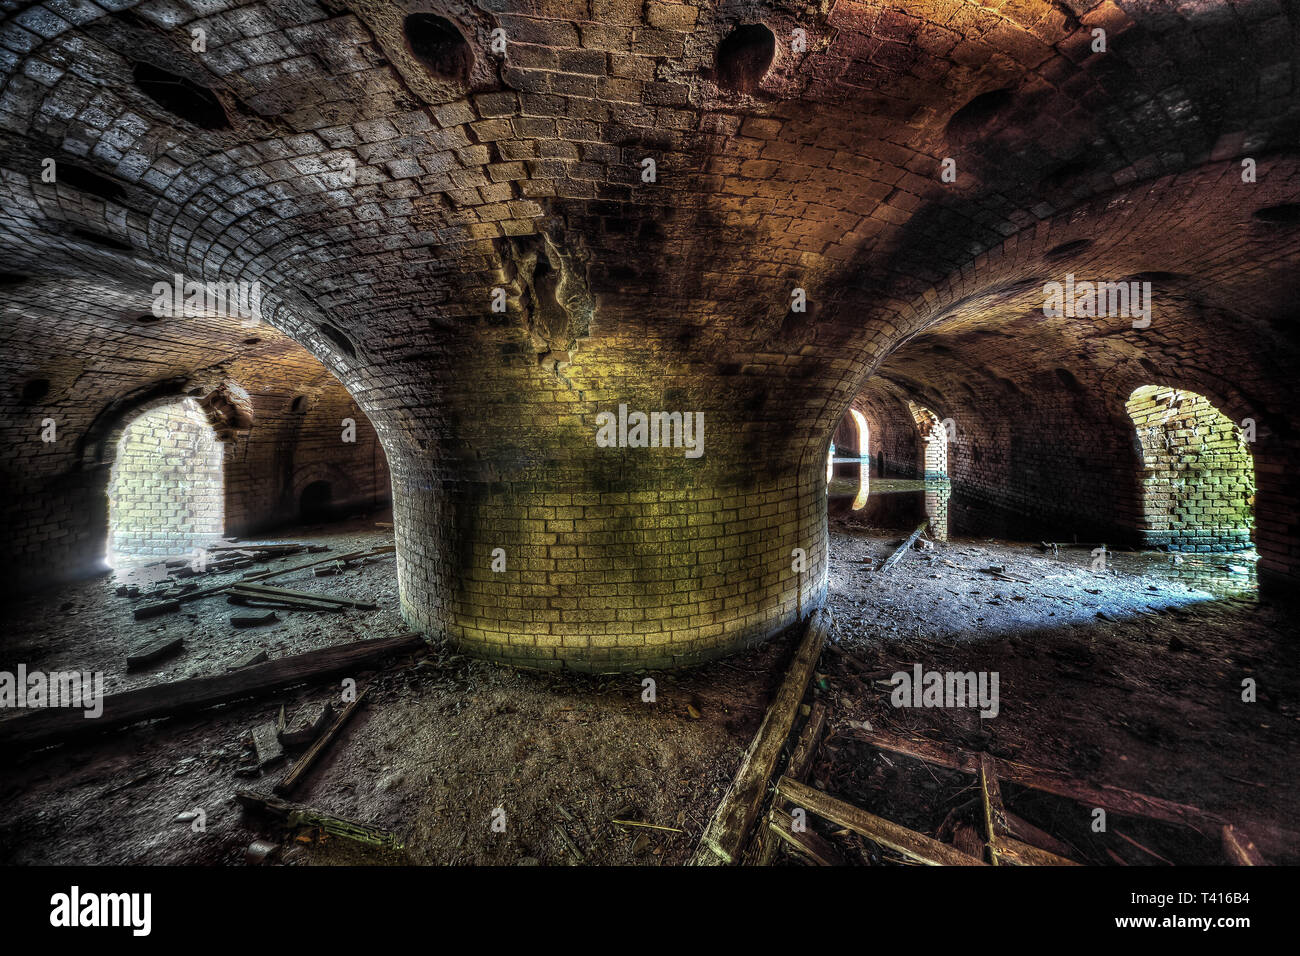 Old abandoned brickyard - Lost Places Stock Photo